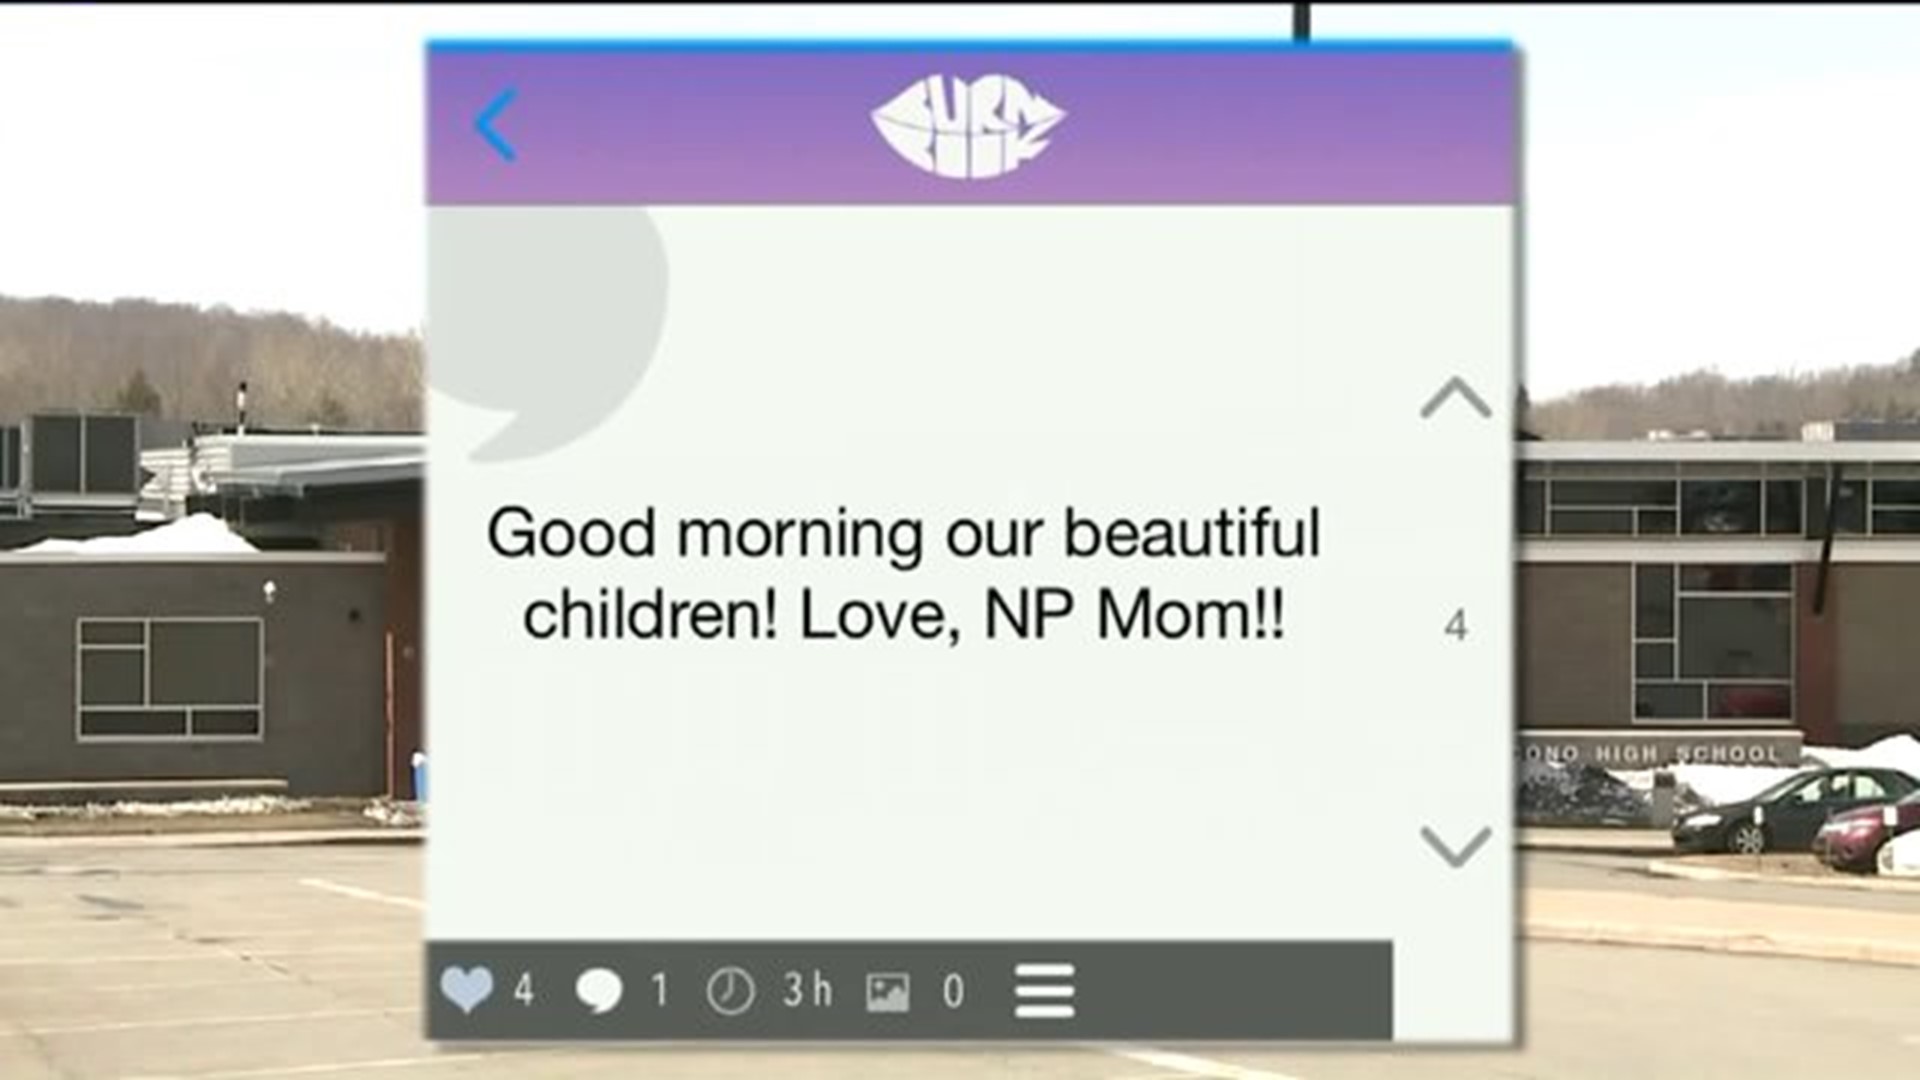 Parents Drown Out Cruelty on Burnbook App